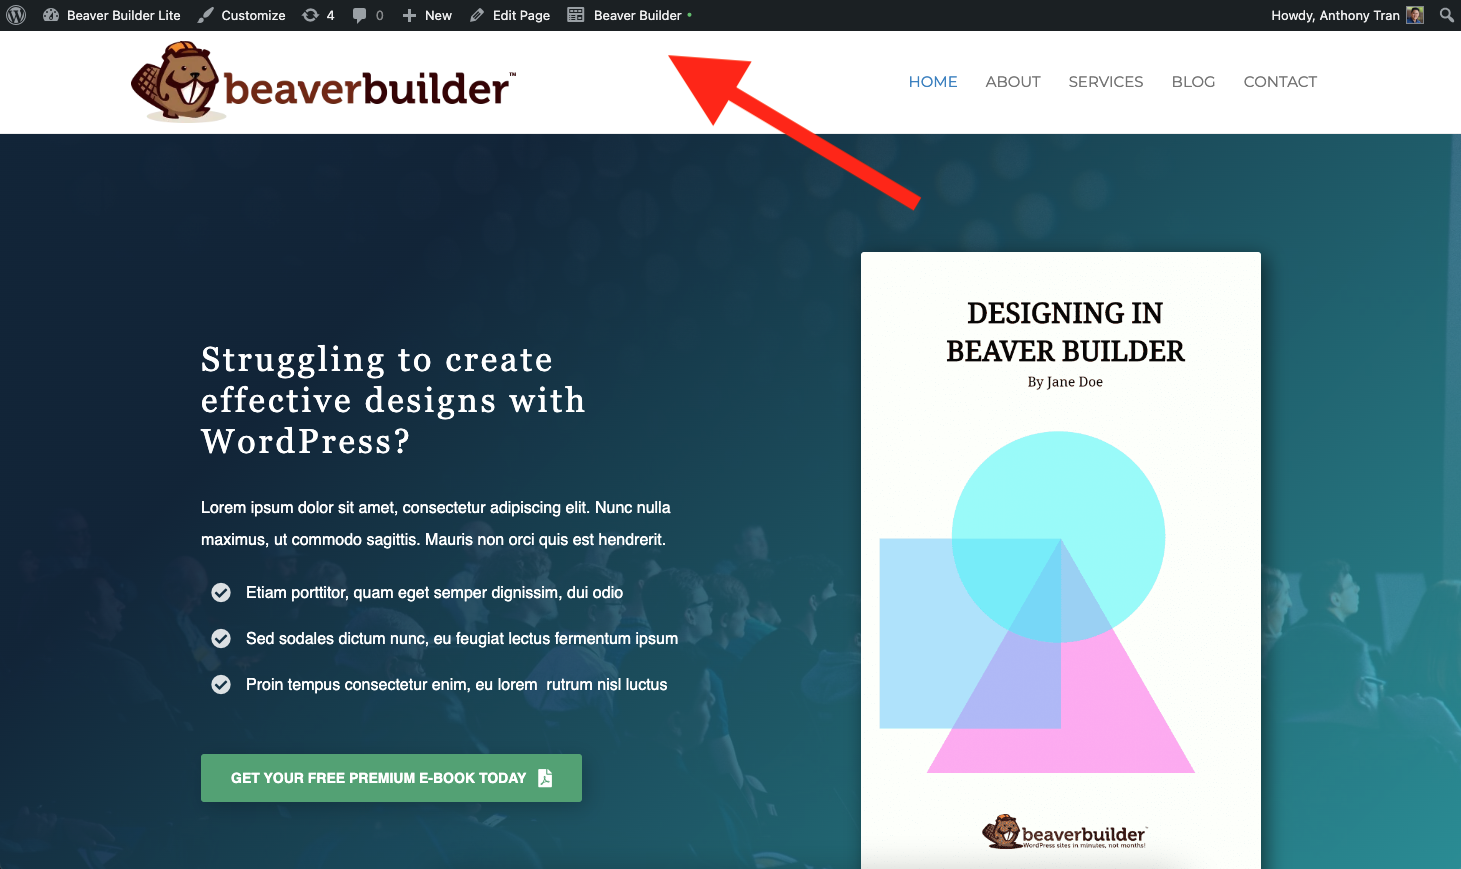 Starting Beaver Builder from the front end.